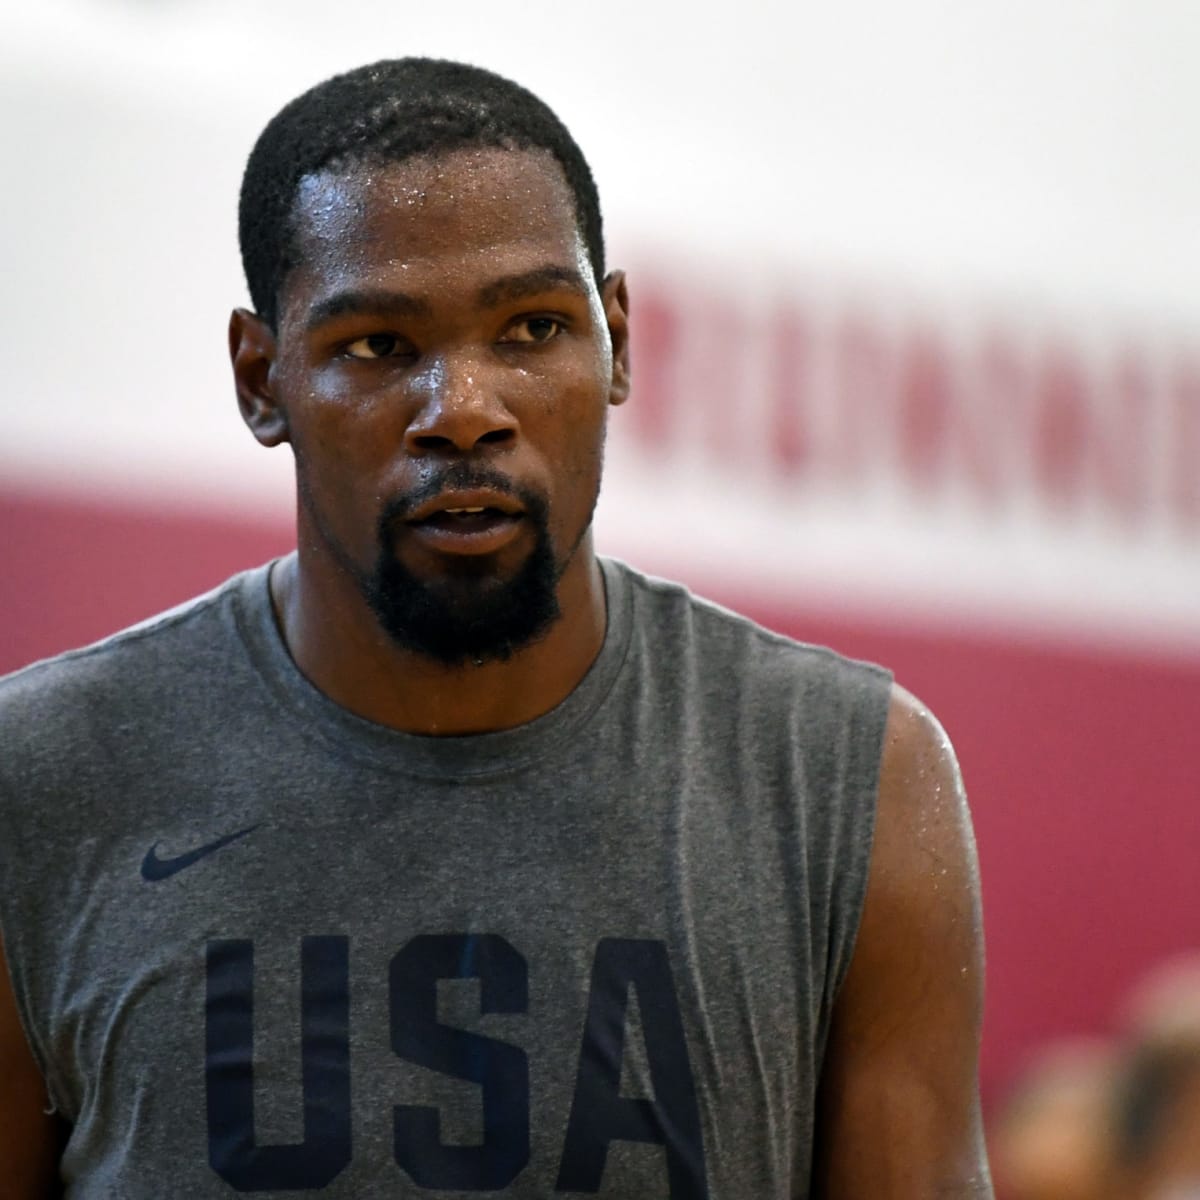 Kevin Durant stars as Team USA claim fourth straight Olympic gold